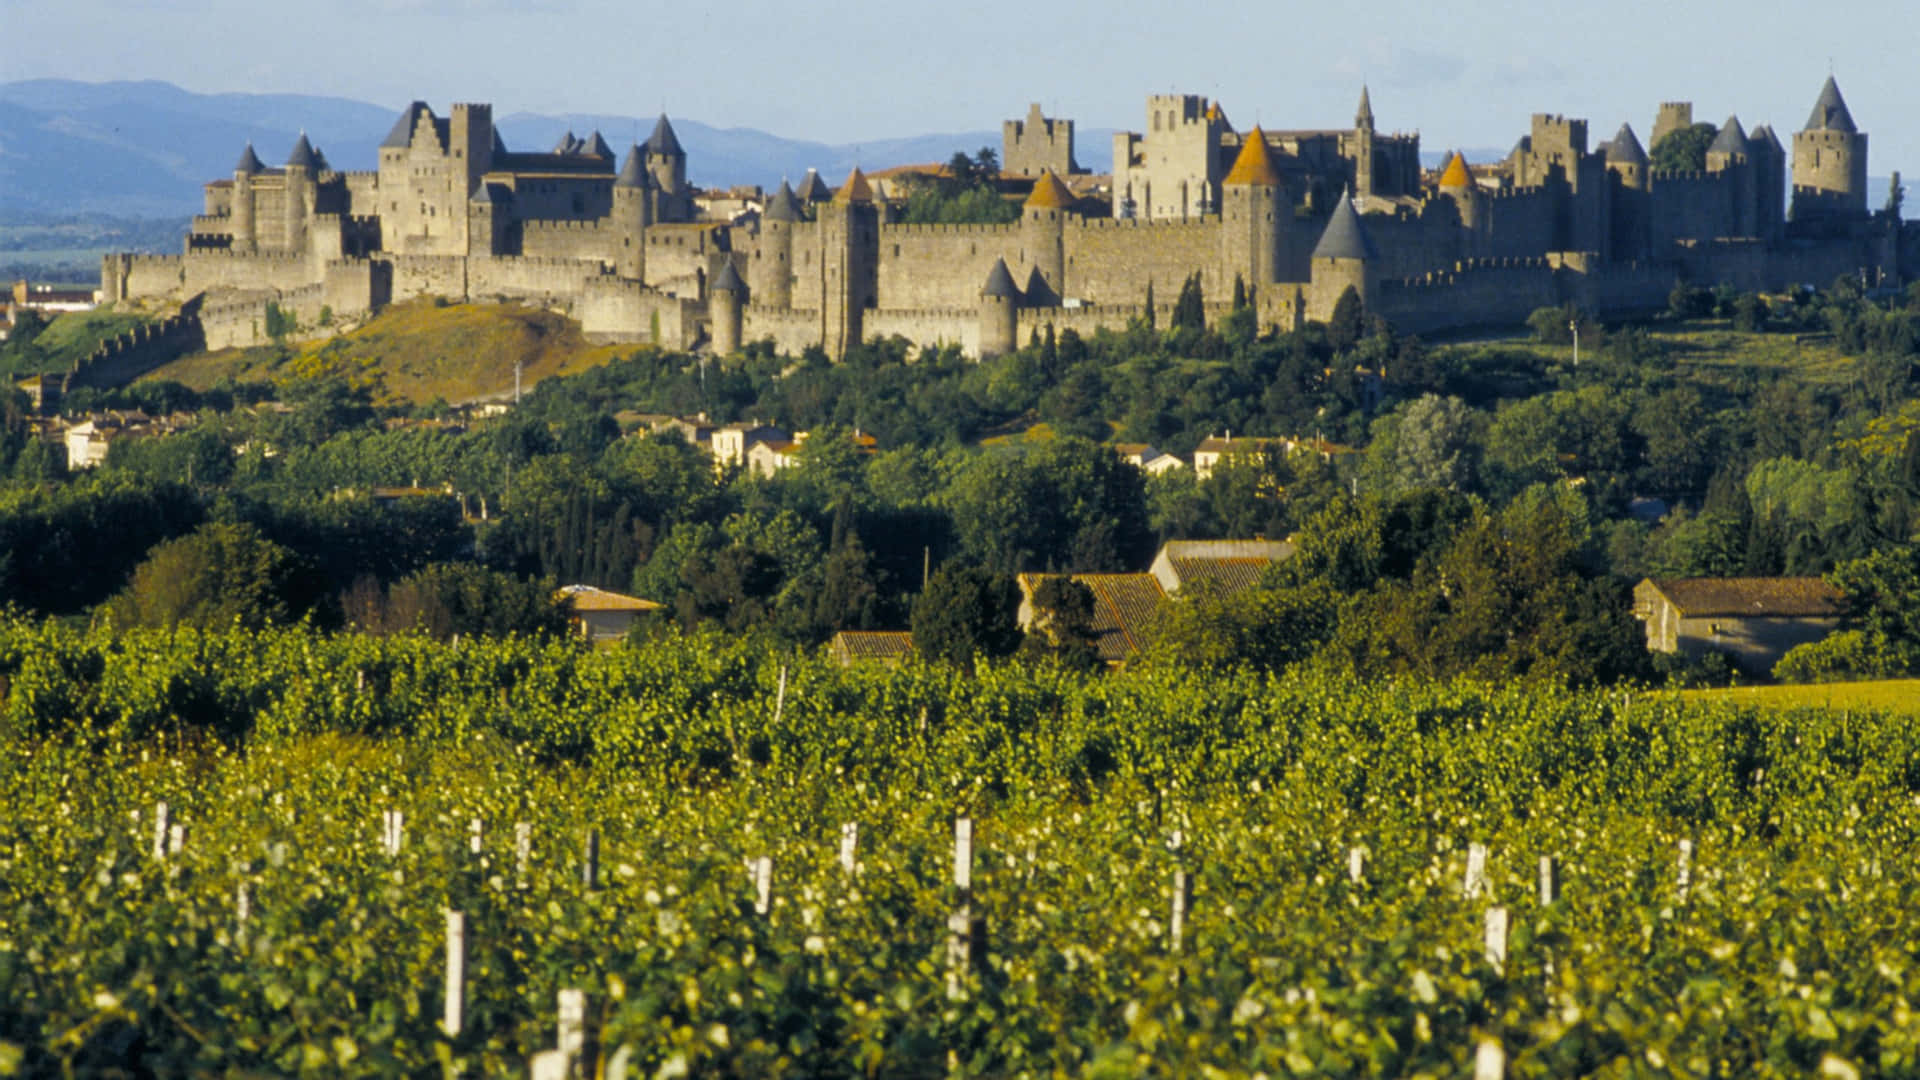 Cite De Carcassonne Fortress In France Picture